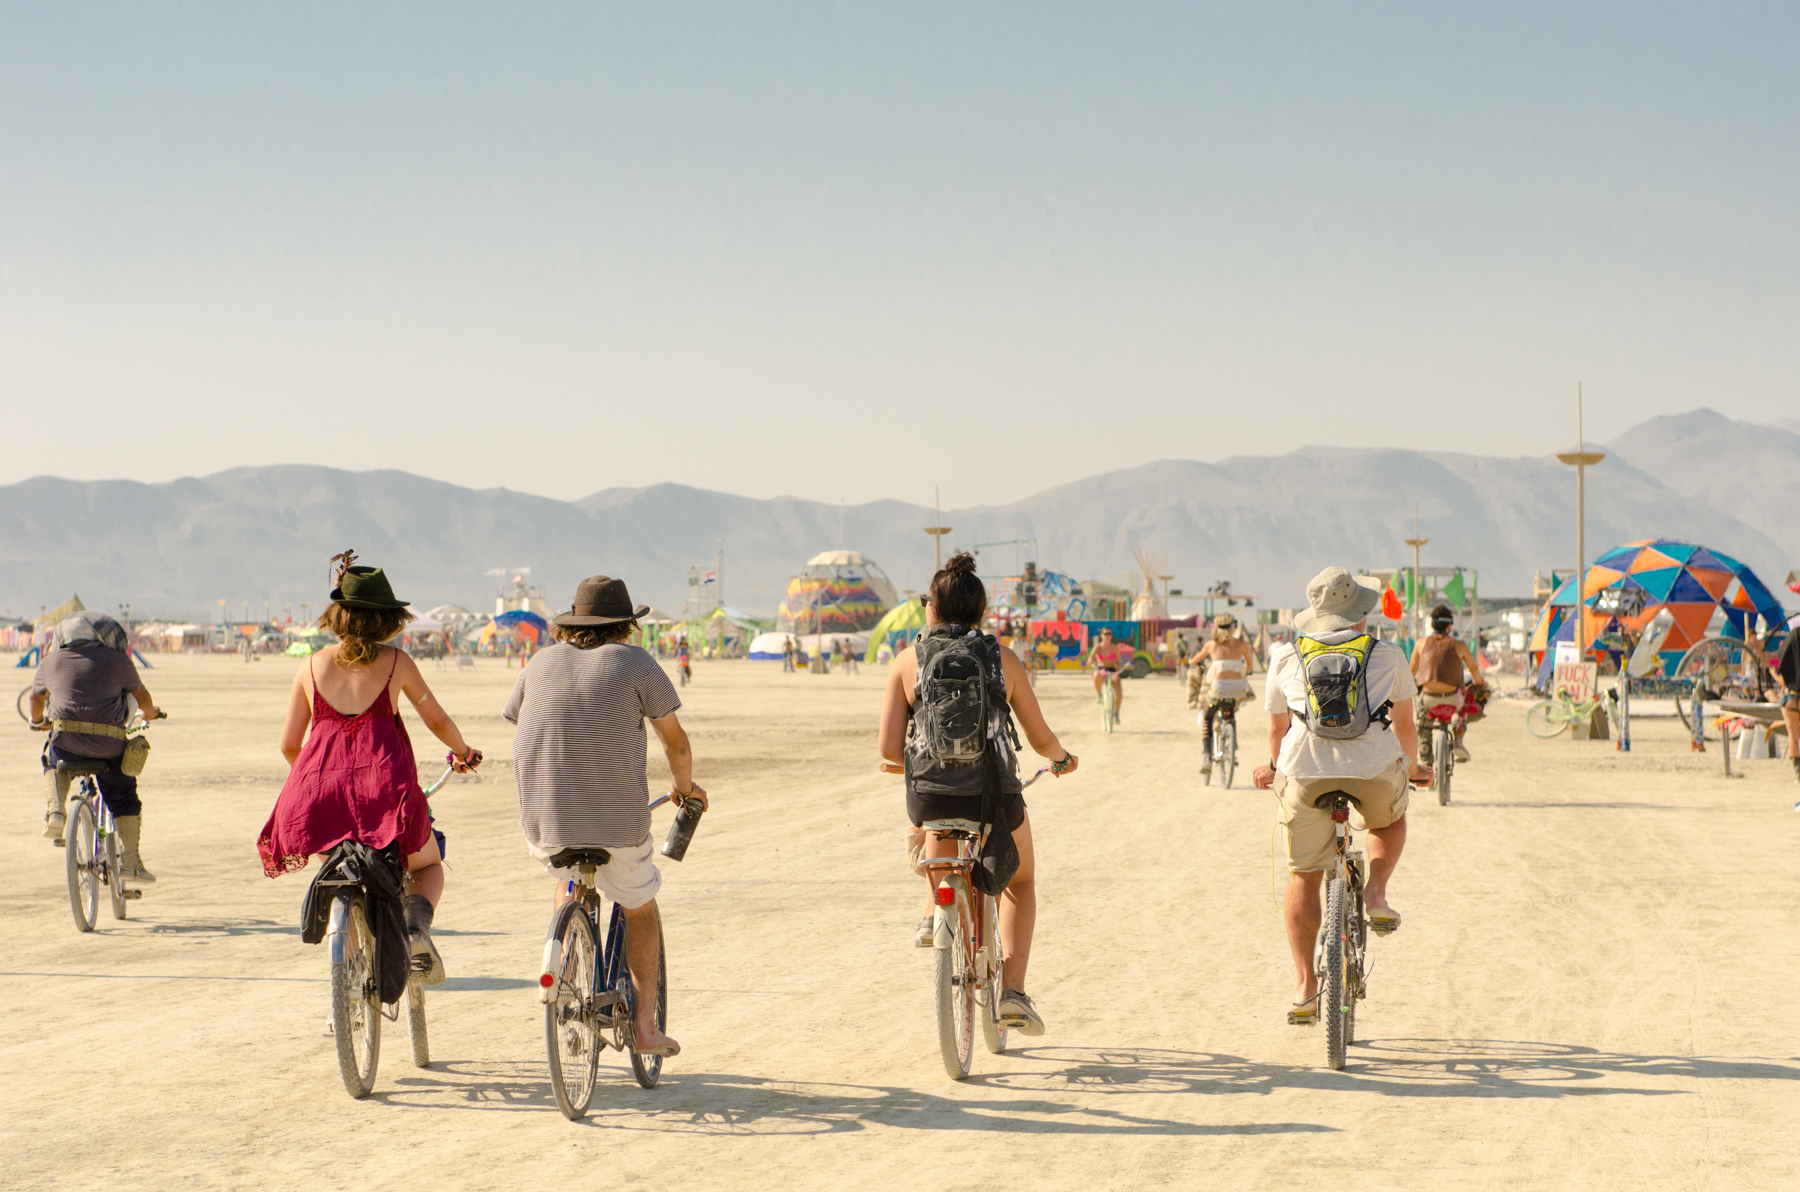 I was glad I bought a bicycle to take to Burning Man - it would take you hours to walk around the city without wheels. 